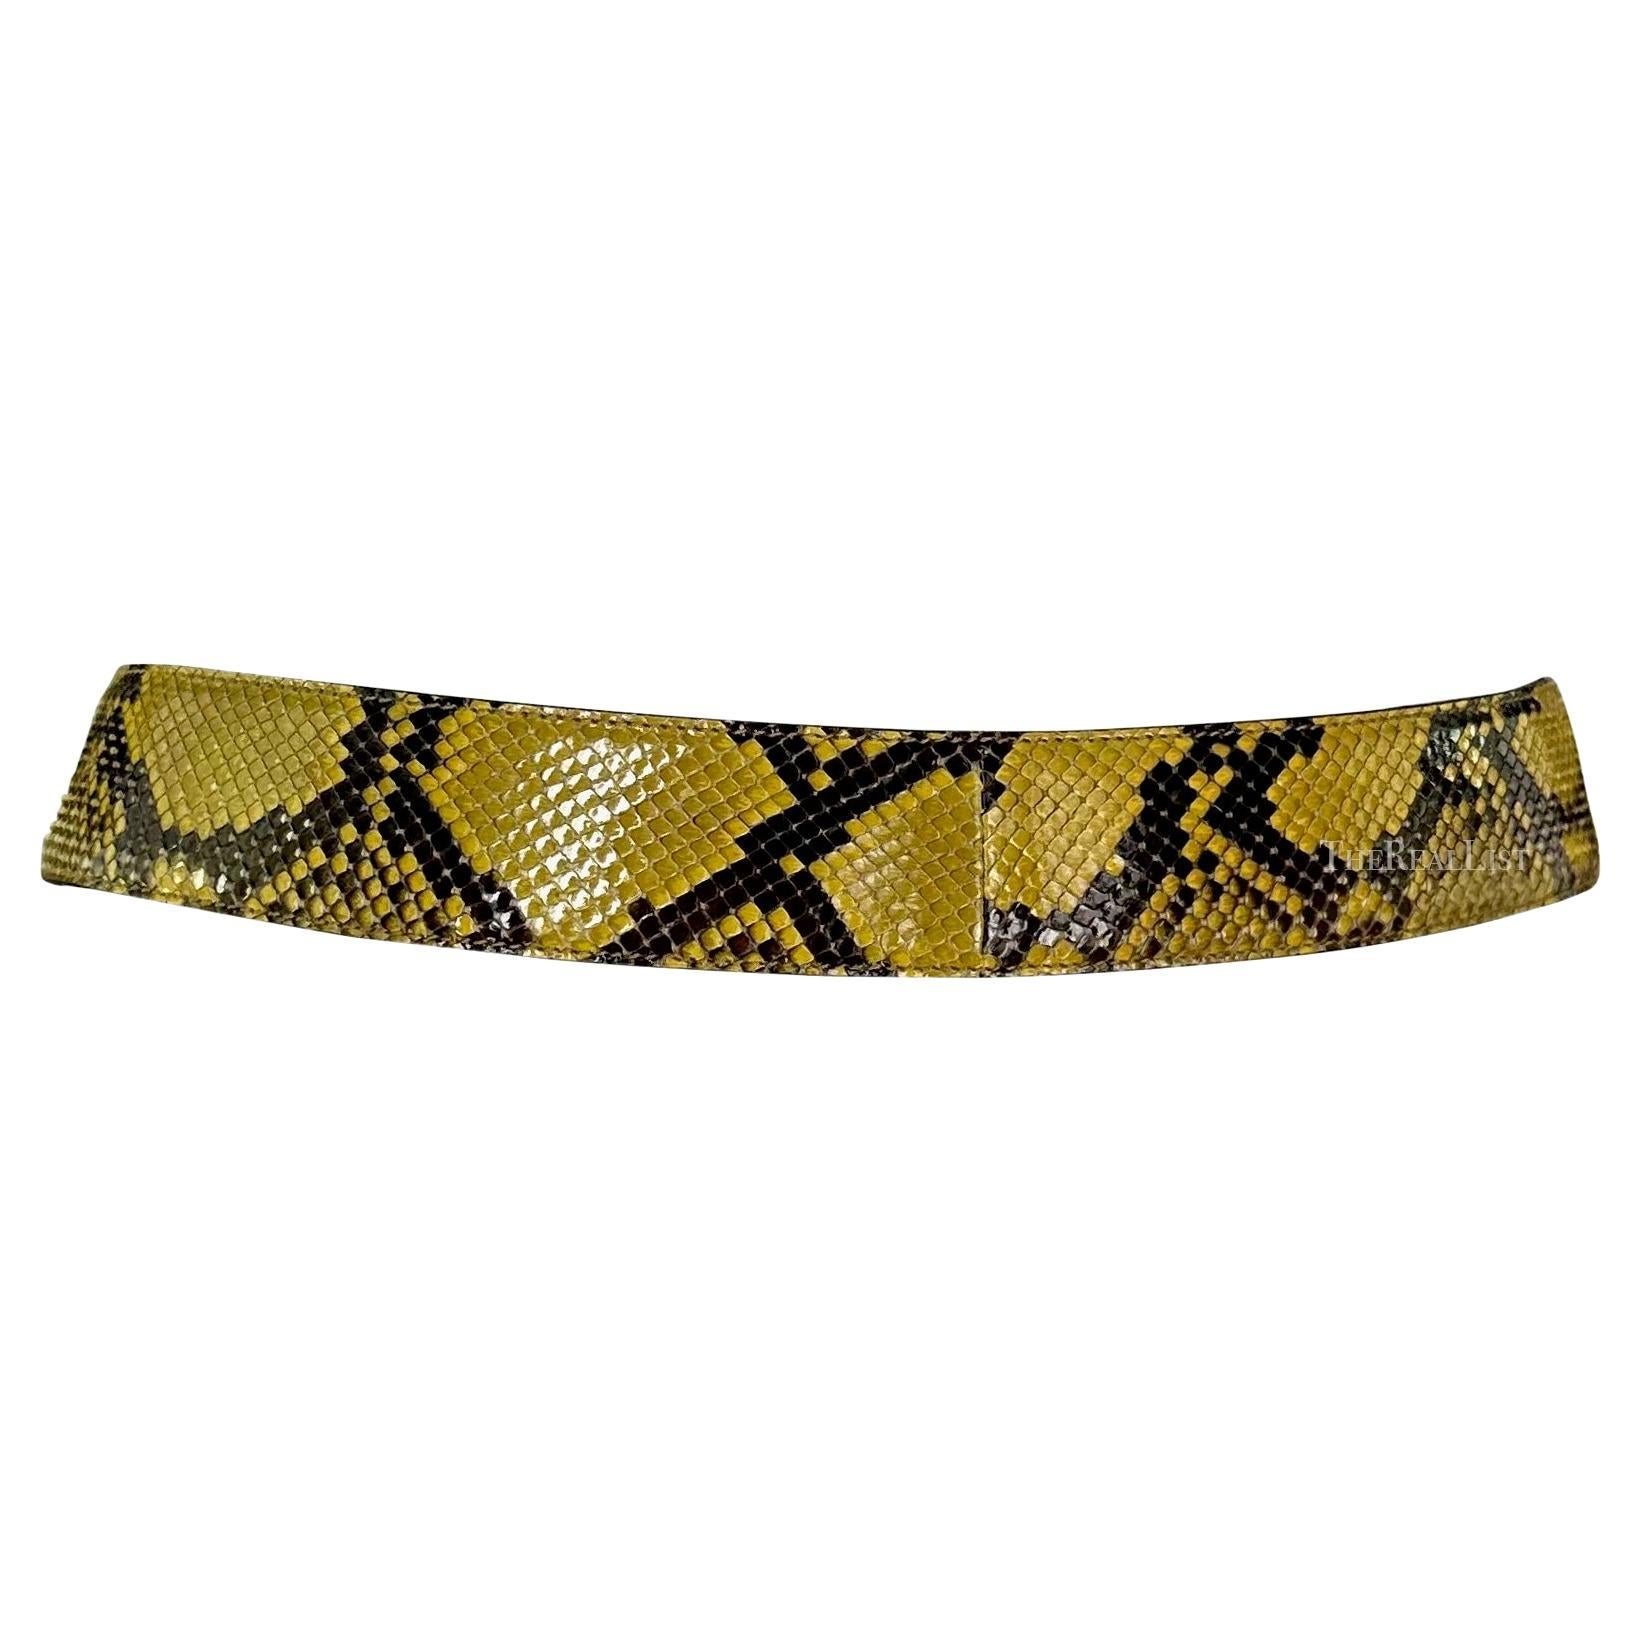 S/S 1996 Gucci by Tom Ford Runway Yellow Python Silver Ring Logo Hip Belt For Sale 3